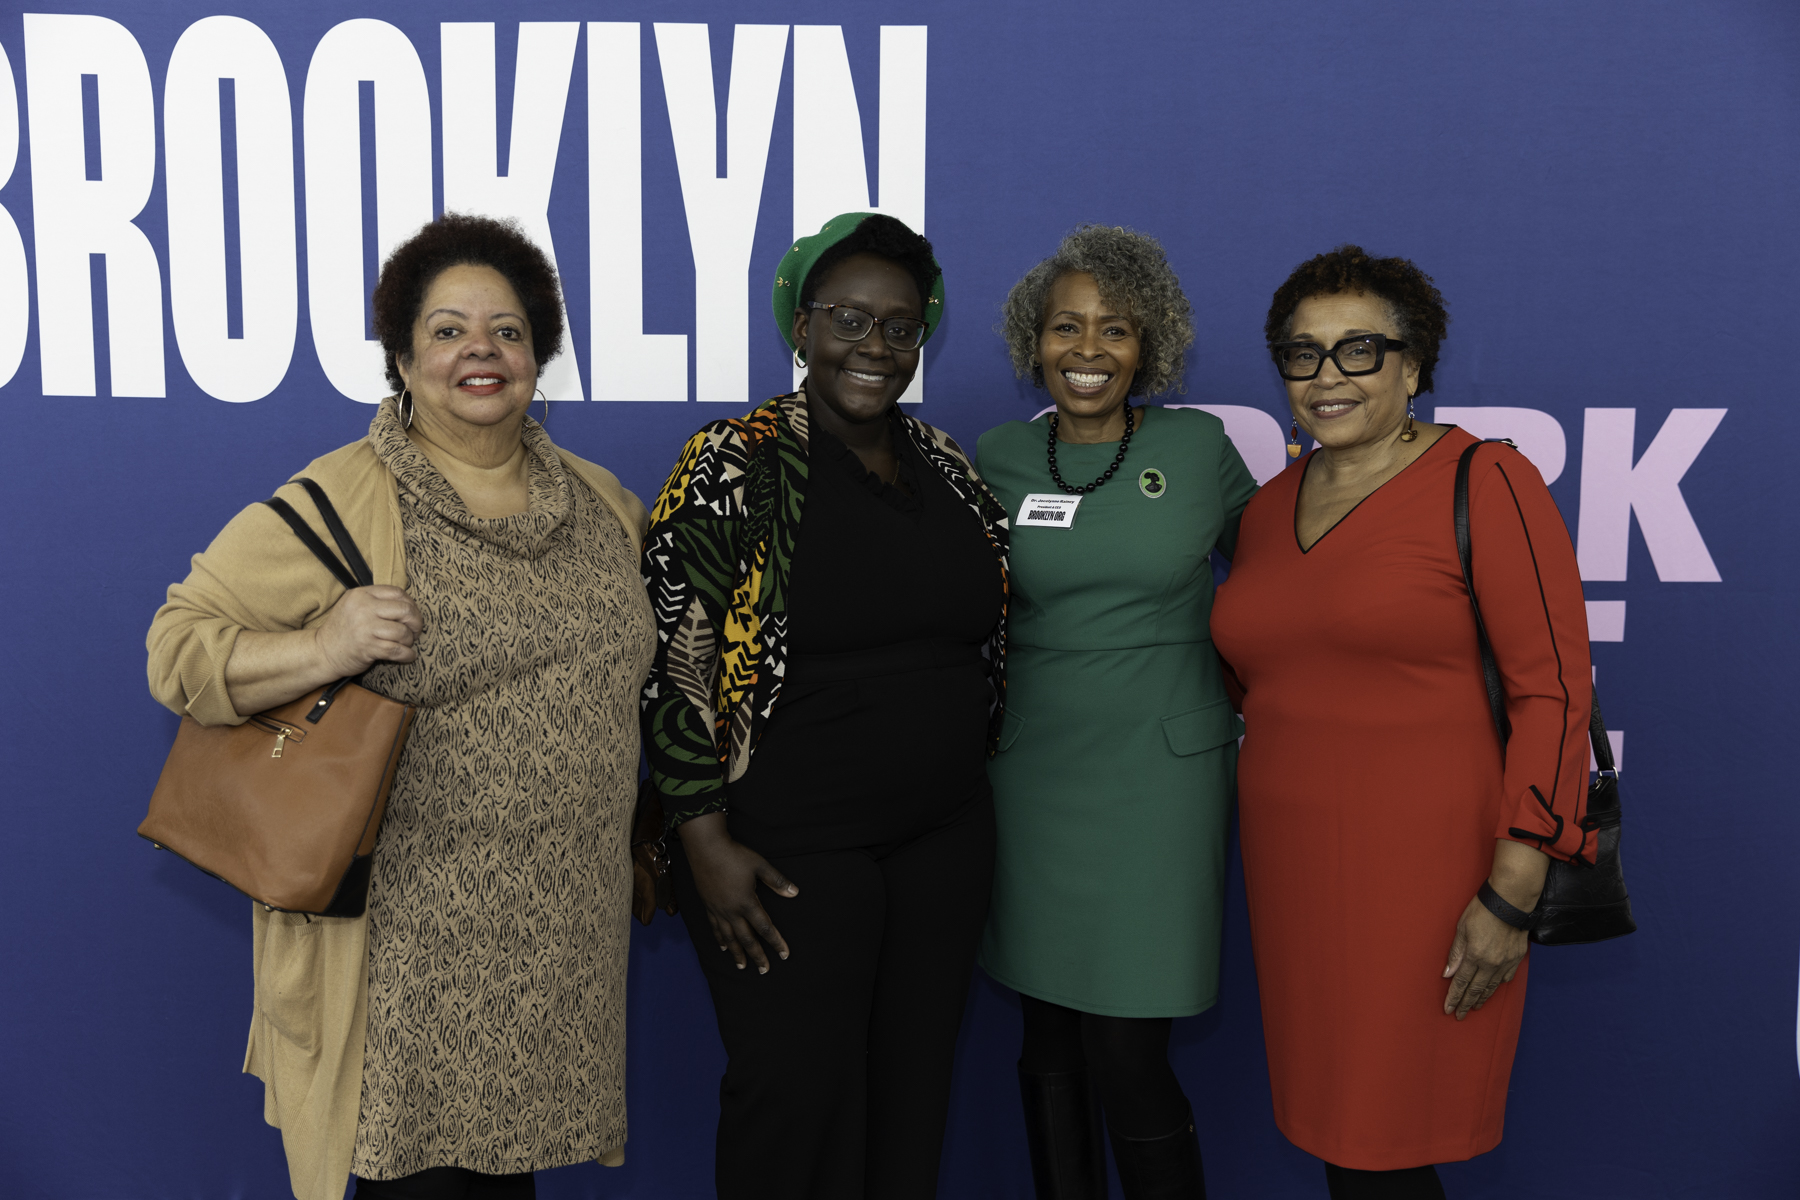 Four women smiling for a photo at a brooklyn event.